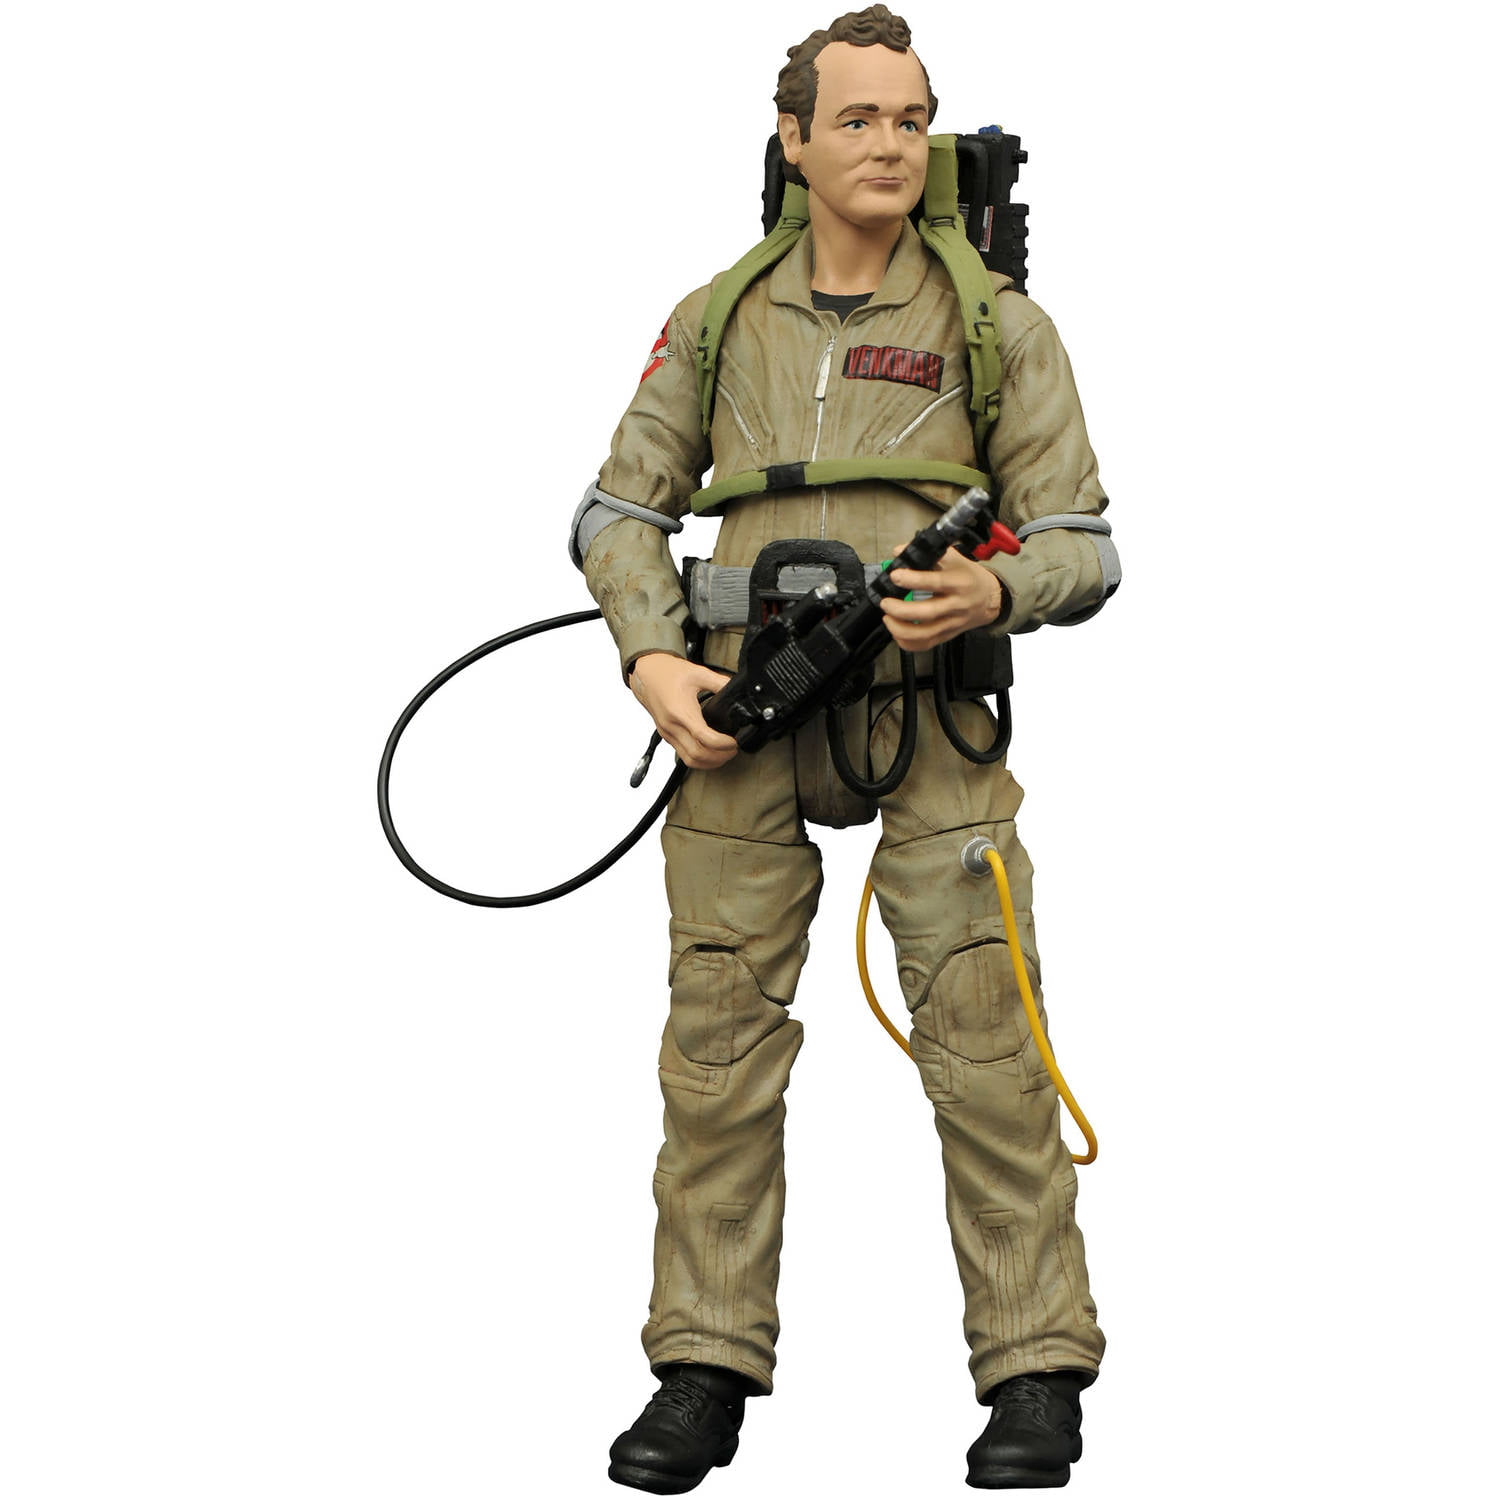 Diamond Select Toys Ghostbusters Select Series 2 Peter ...
 Ghostbusters Toy